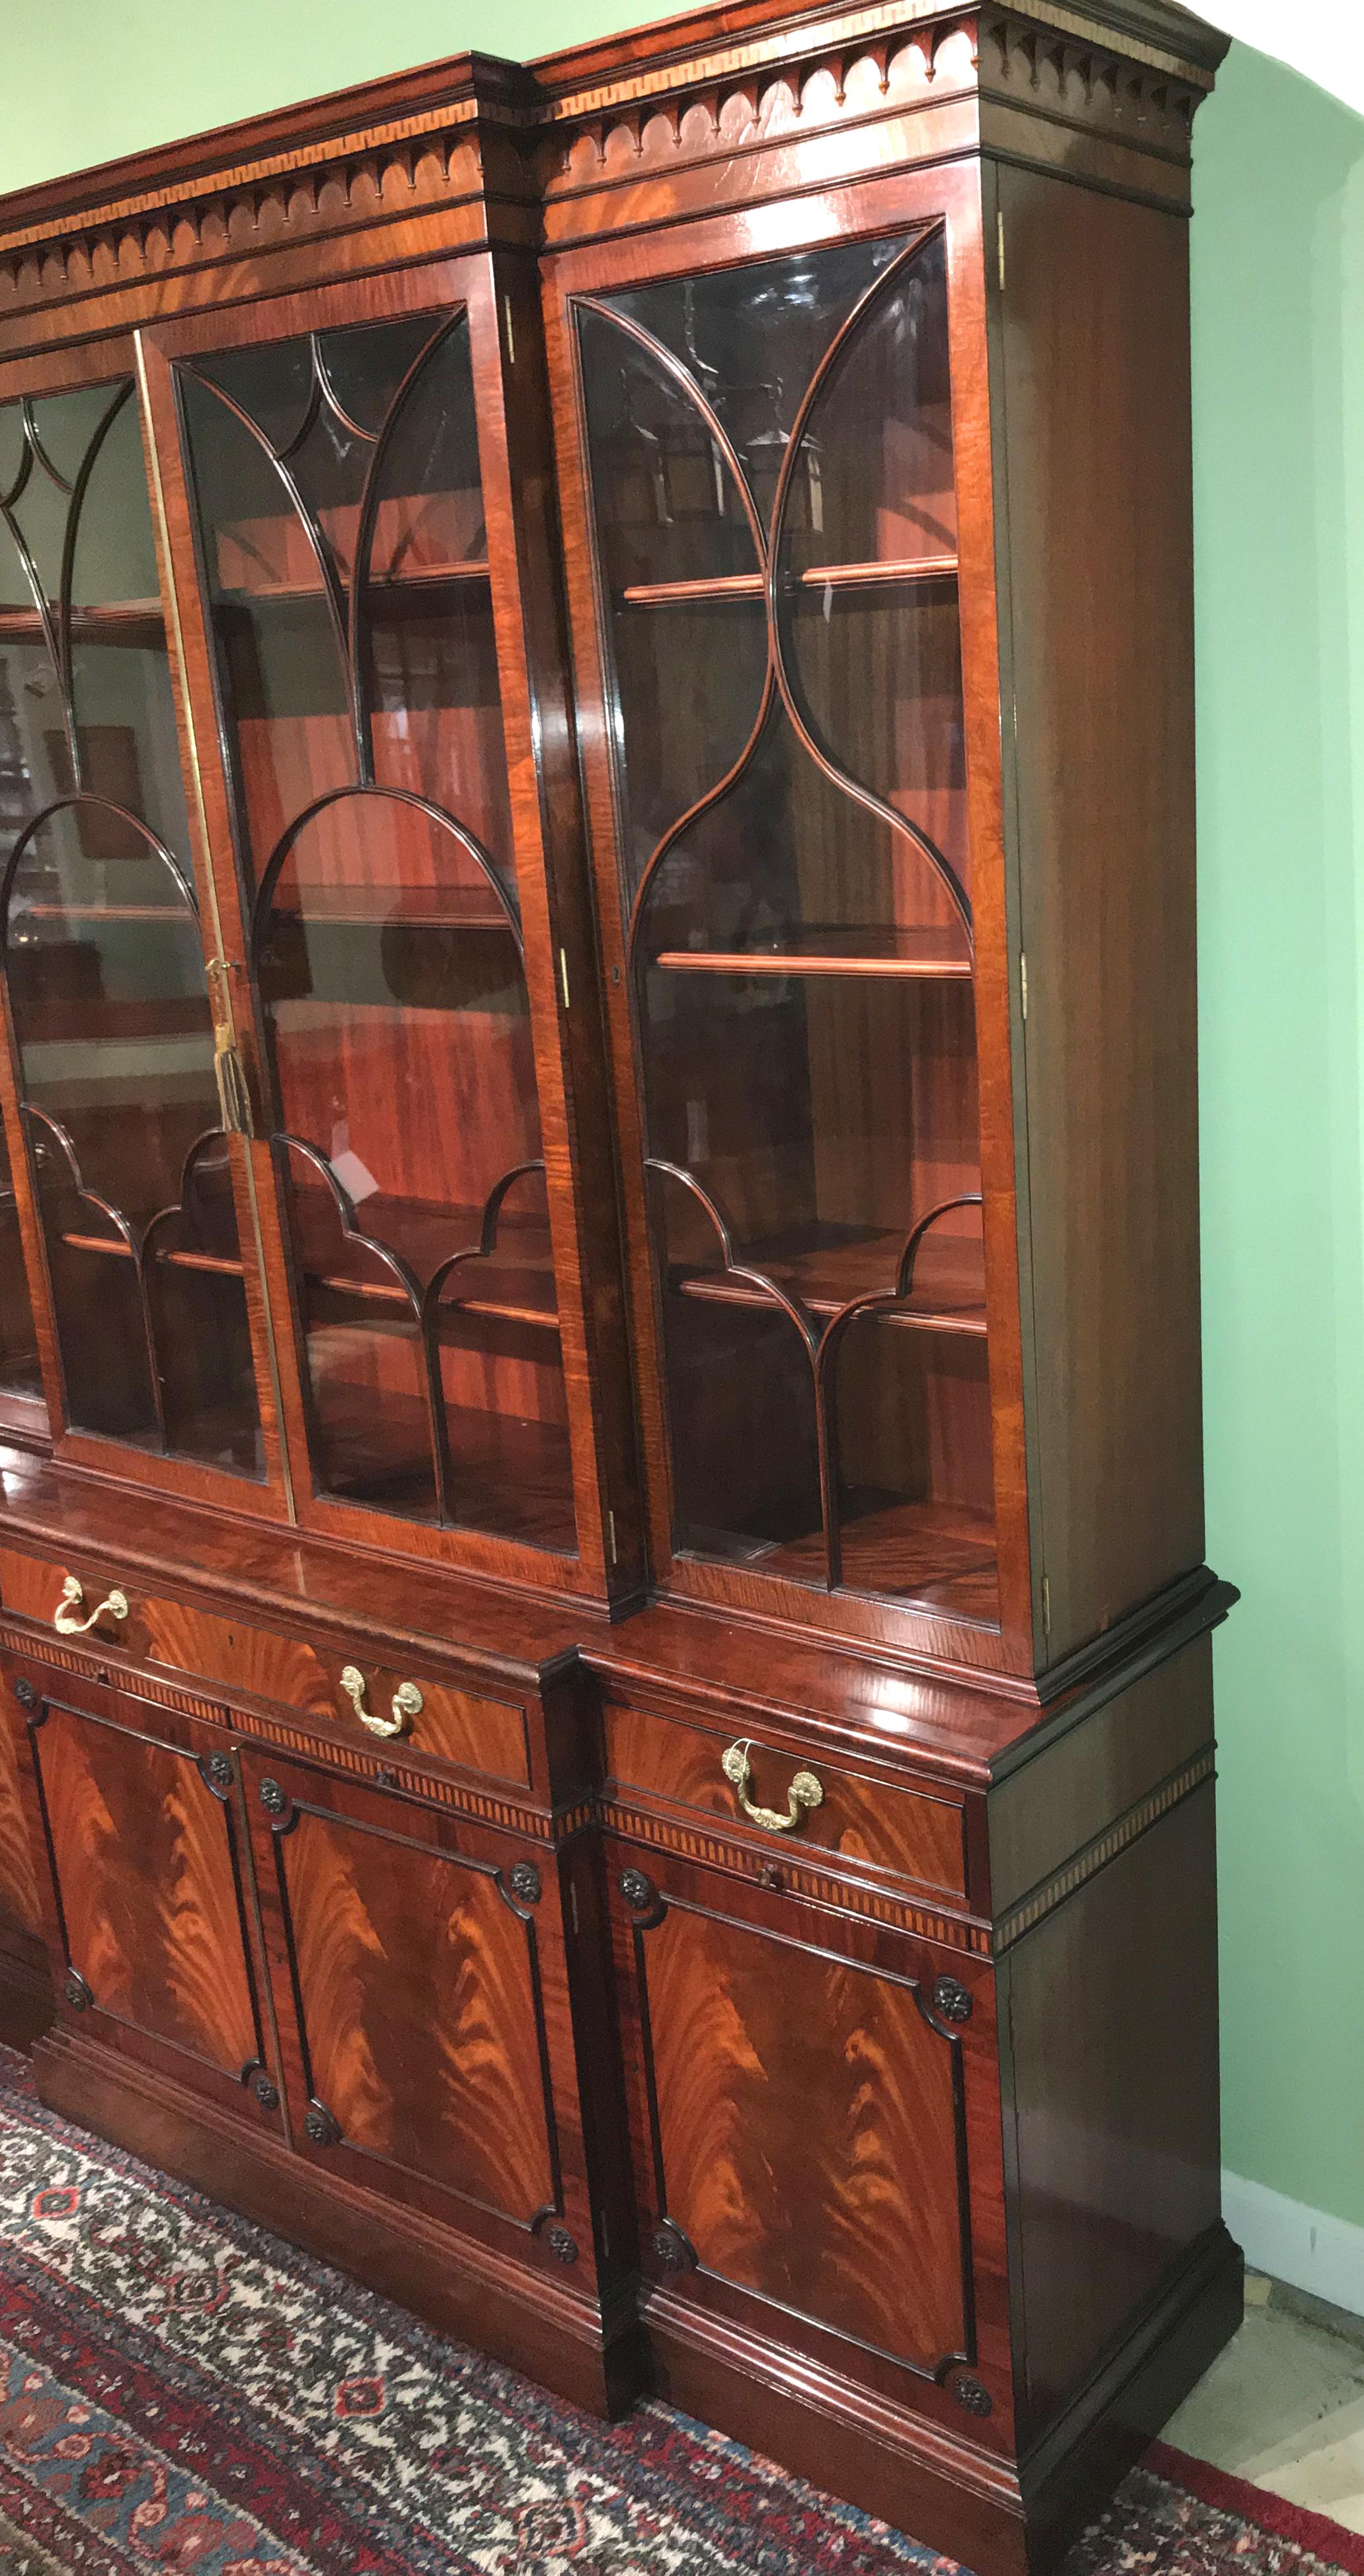 An elegant two part mahogany breakfront sideboard or china cabinet by Schmieg & Kotzian, its upper case with a decorative carved cornice with contrasting key inlay, surmounting four glazed glass doors which open to three adjustable shelves with